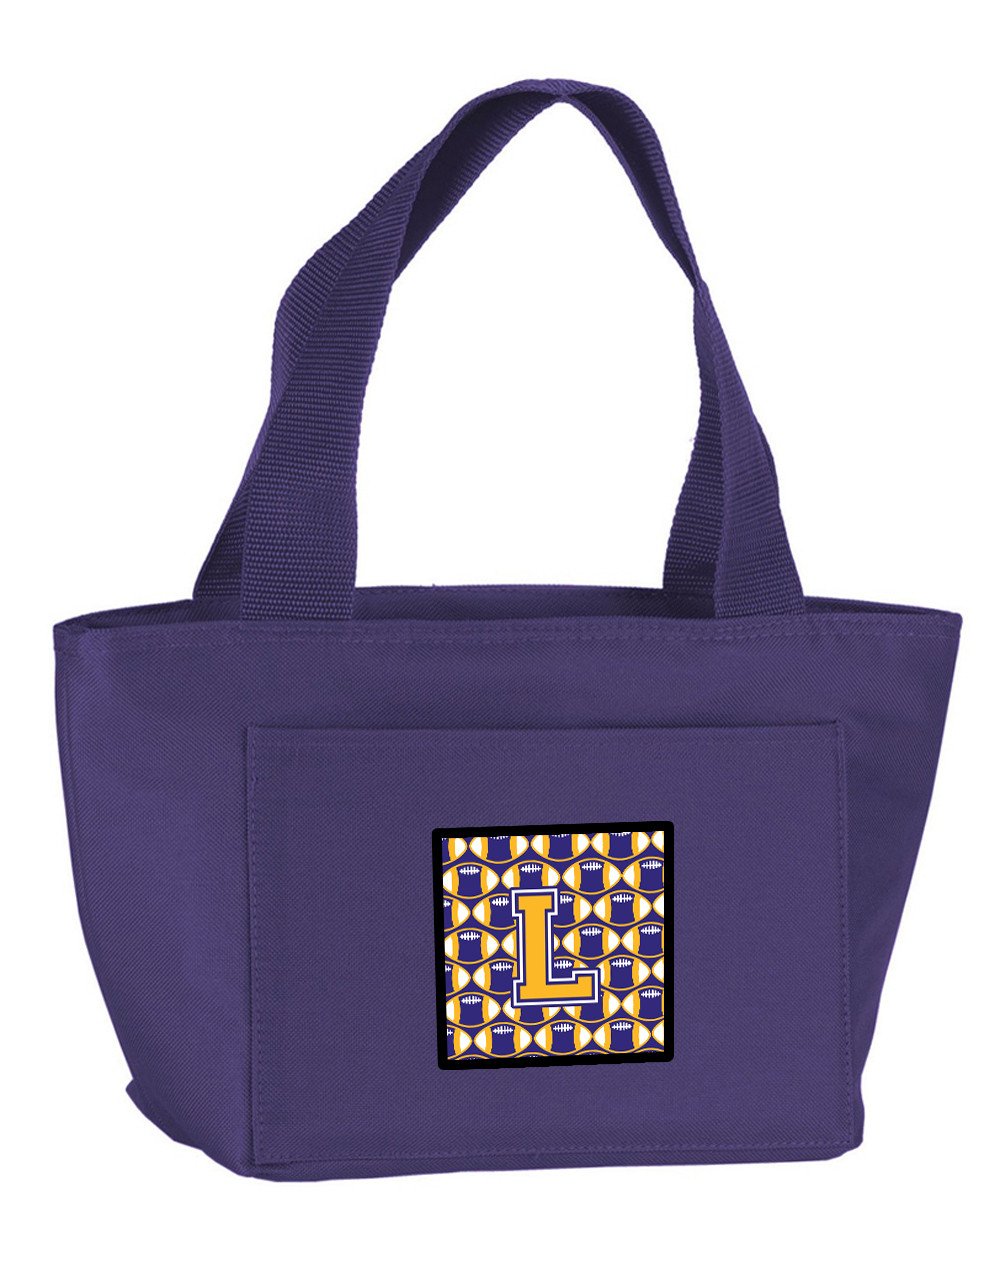 Letter L Football Purple and Gold Lunch Bag CJ1064-LPR-8808 by Caroline's Treasures